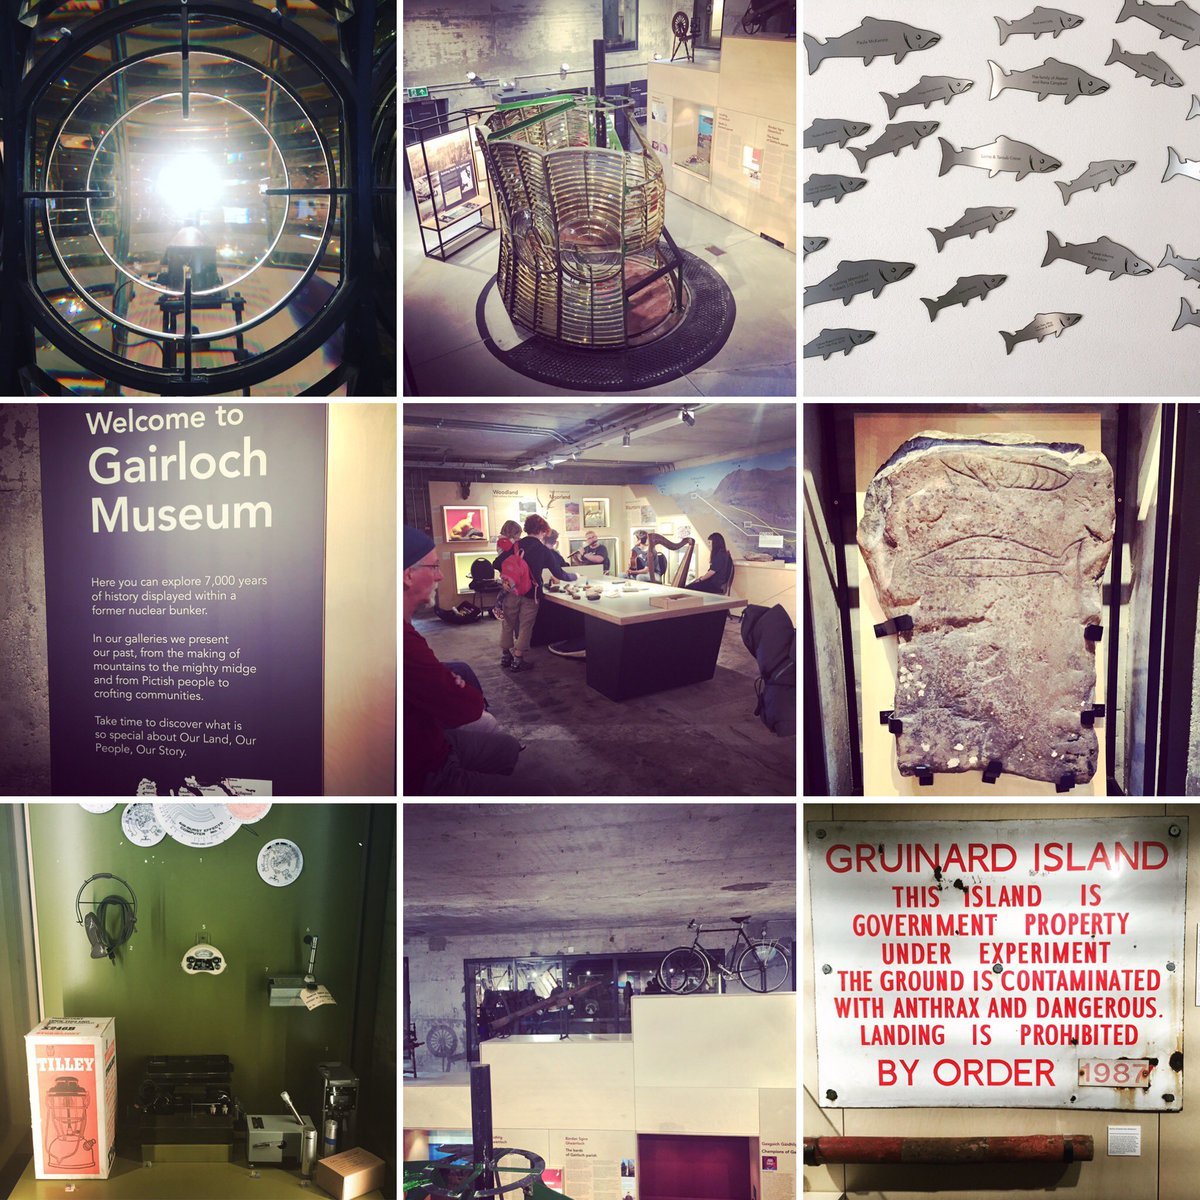 I love the museums I’ve visited in communities across the UK, and hold generation upon generation of knowledge and wonder. Shout out to the fabulous  @GairlochMuseum  @kilmartinmuseum  @VindolandaTrust